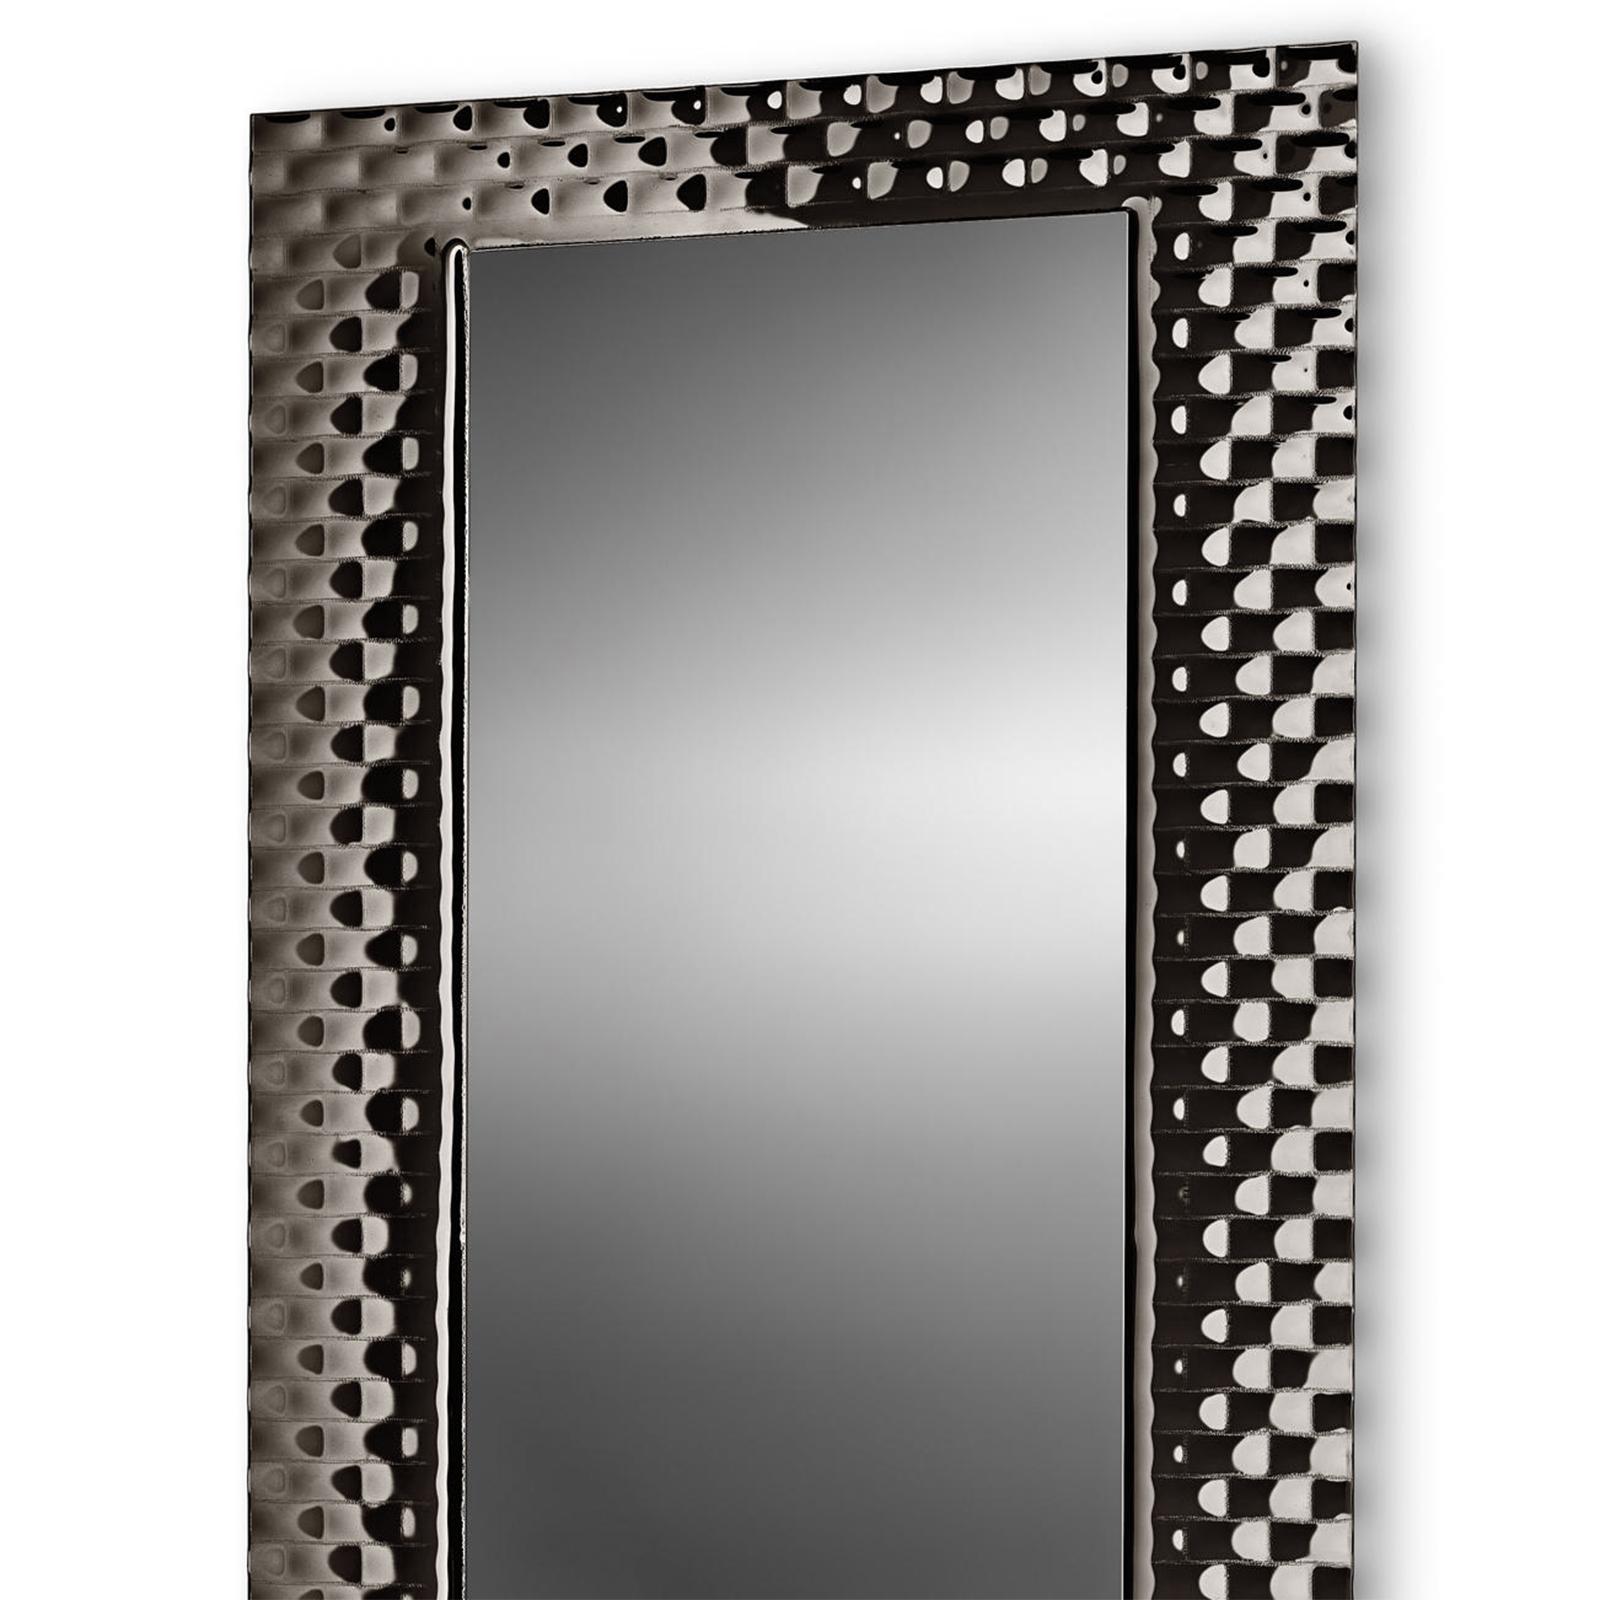 Mirror black manor rectangular in fused glass 6mm
thickness with back-silvered frame. With flat mirror in
smoked finish 5mm thickness.
Also available in Bronze finish.